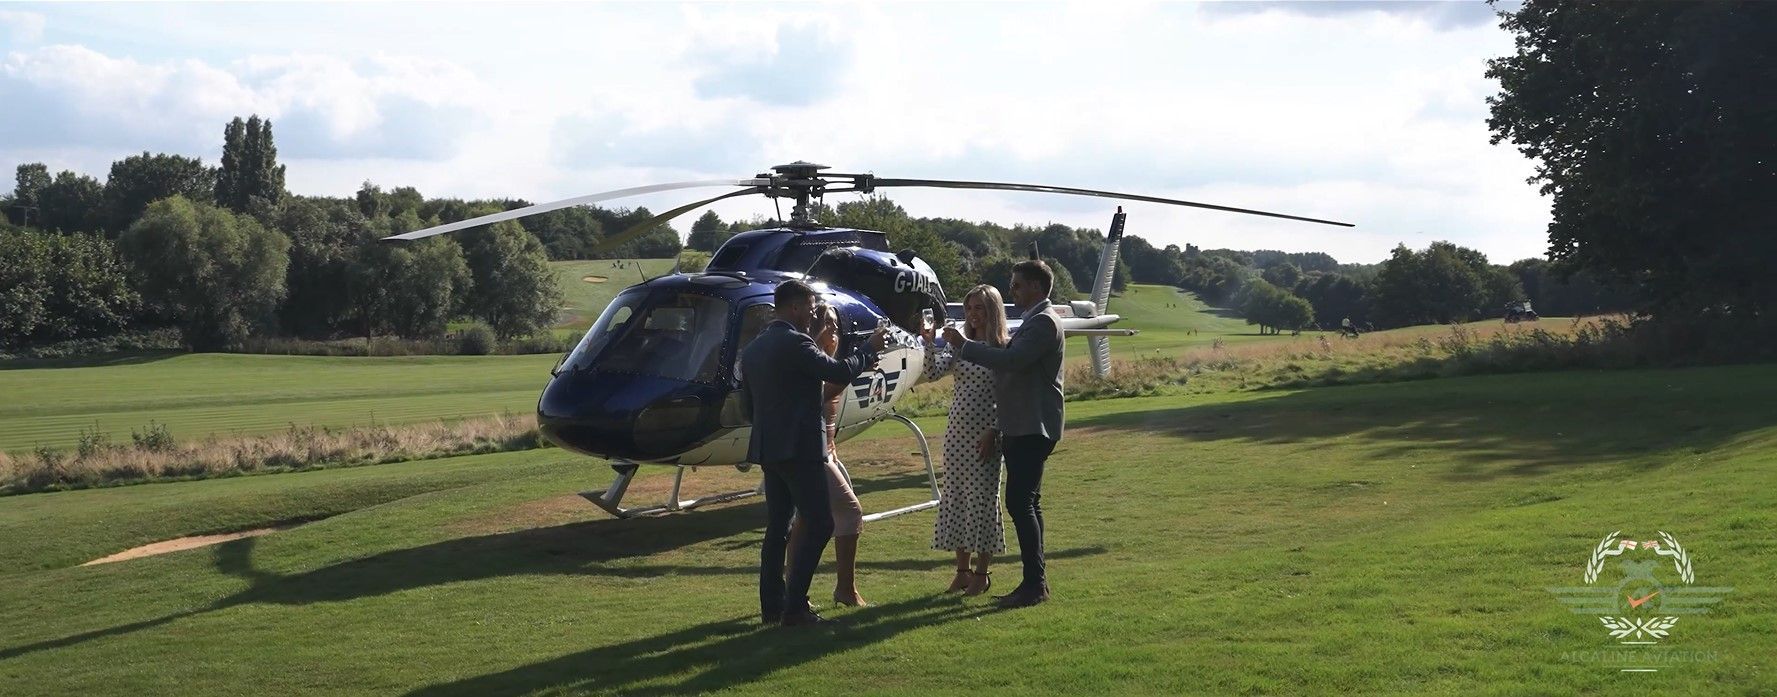 A couple is standing next to a helicopter in a field.